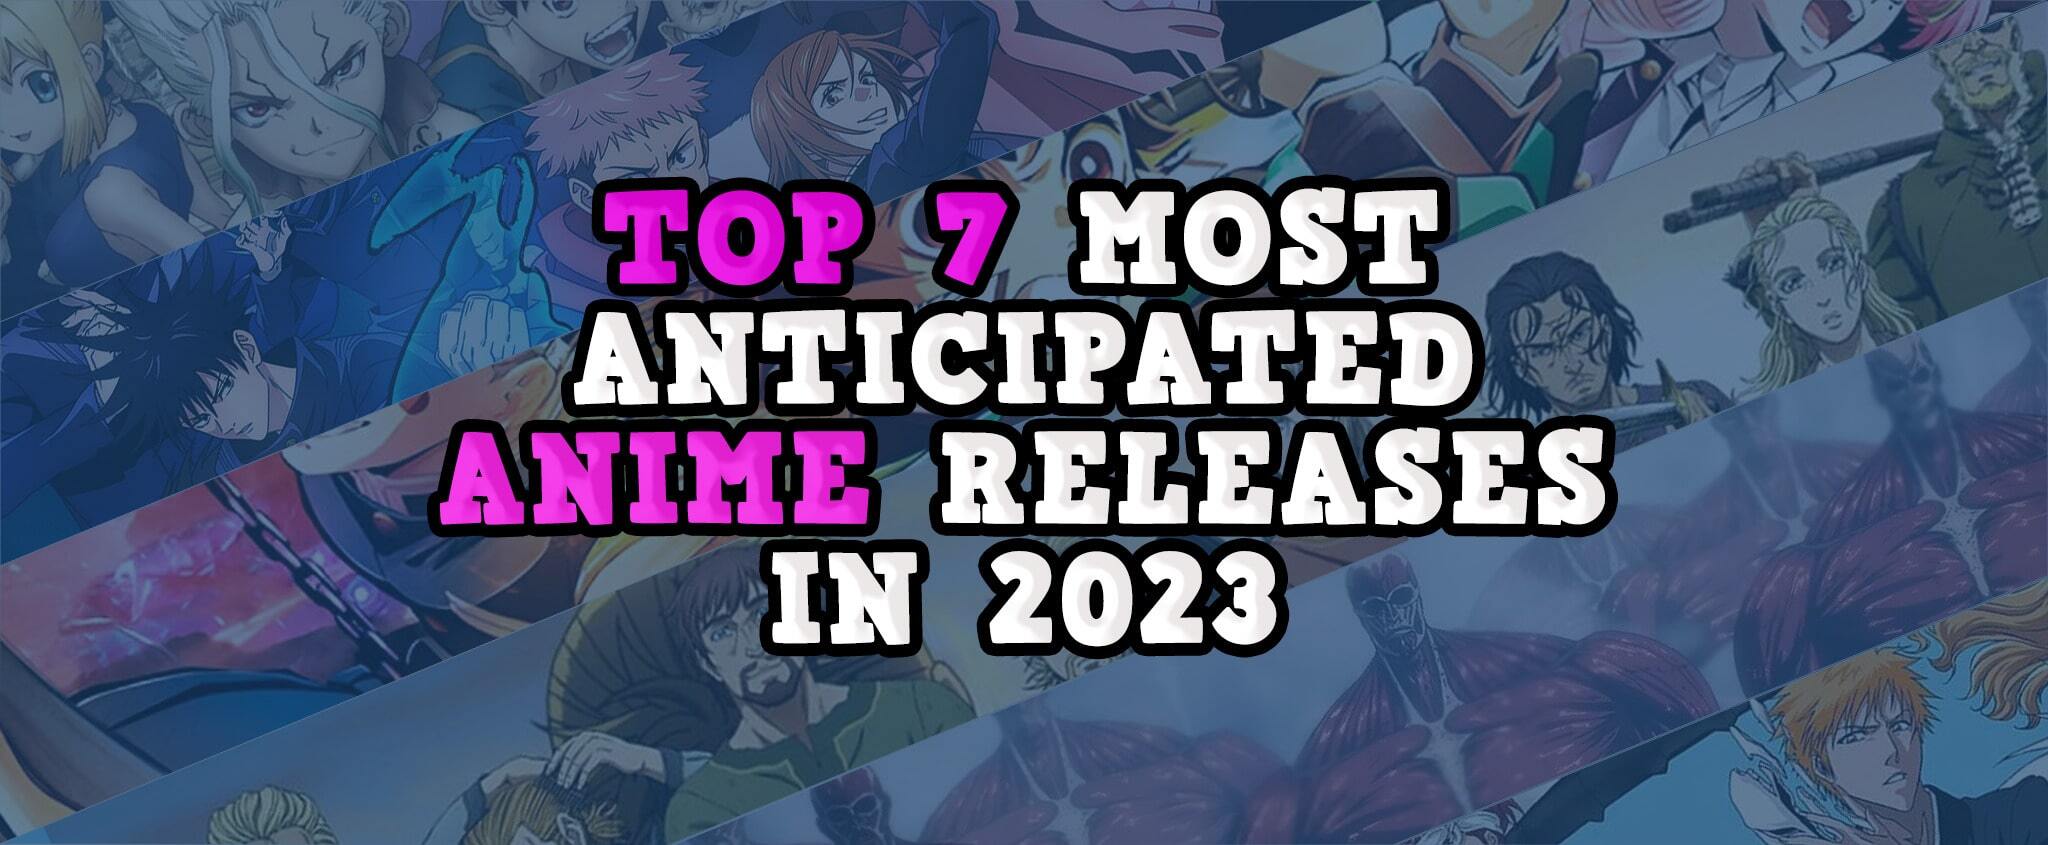 Top 7 most anticipated anime releases in 2023 written